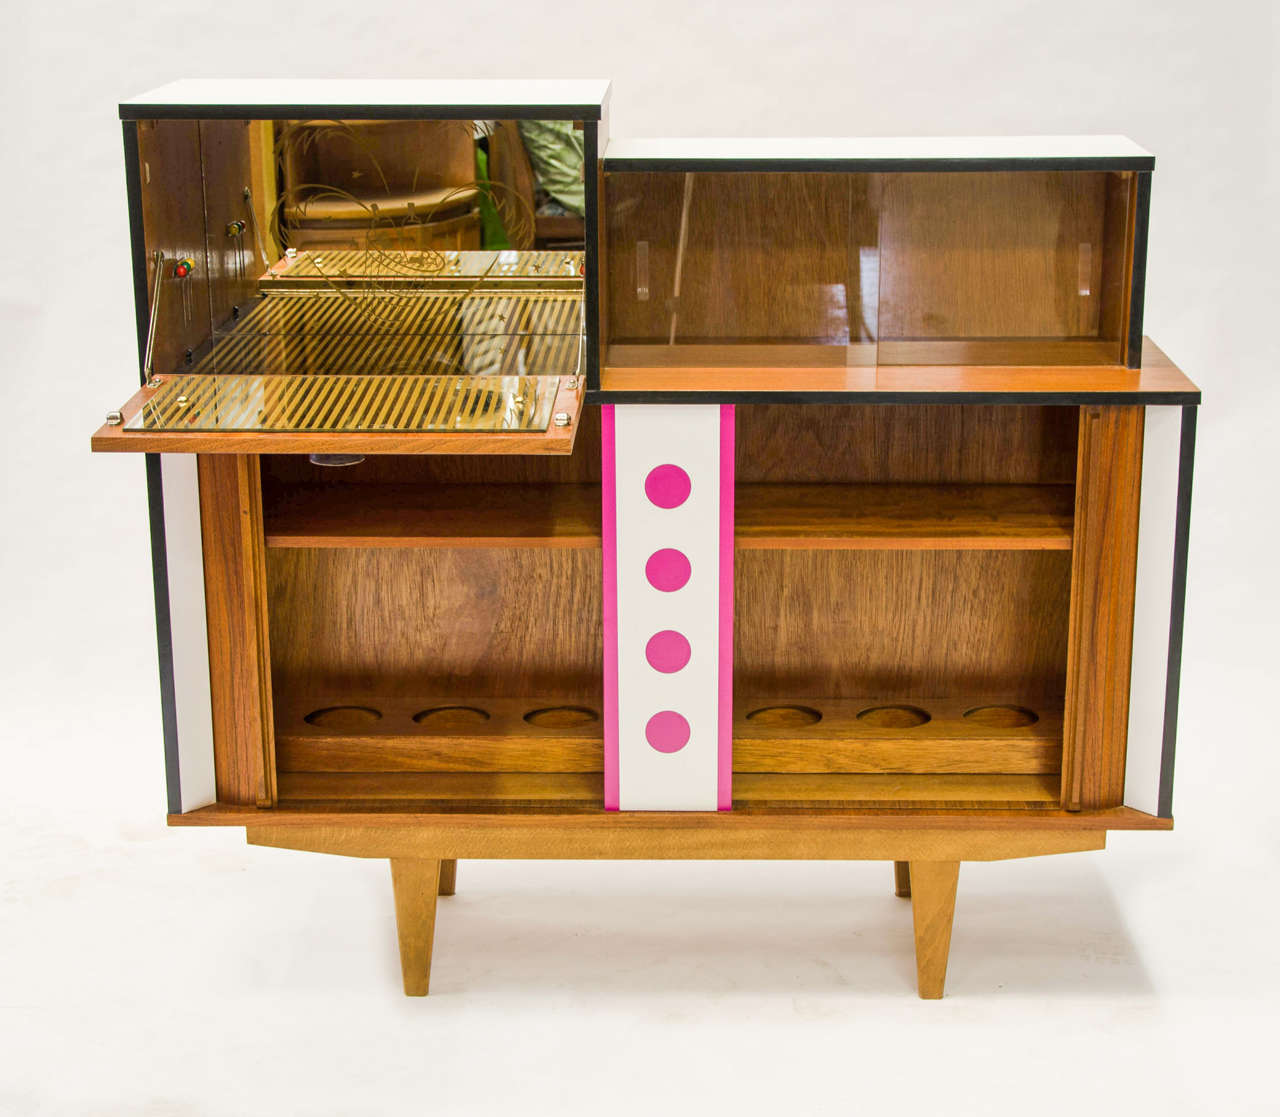 A teak and laminate veneer drinks cabinet featuring bottle storage rack, fold down mirrored drinks shelf with period graphics. New color laminates applied for further accentuation of the design.